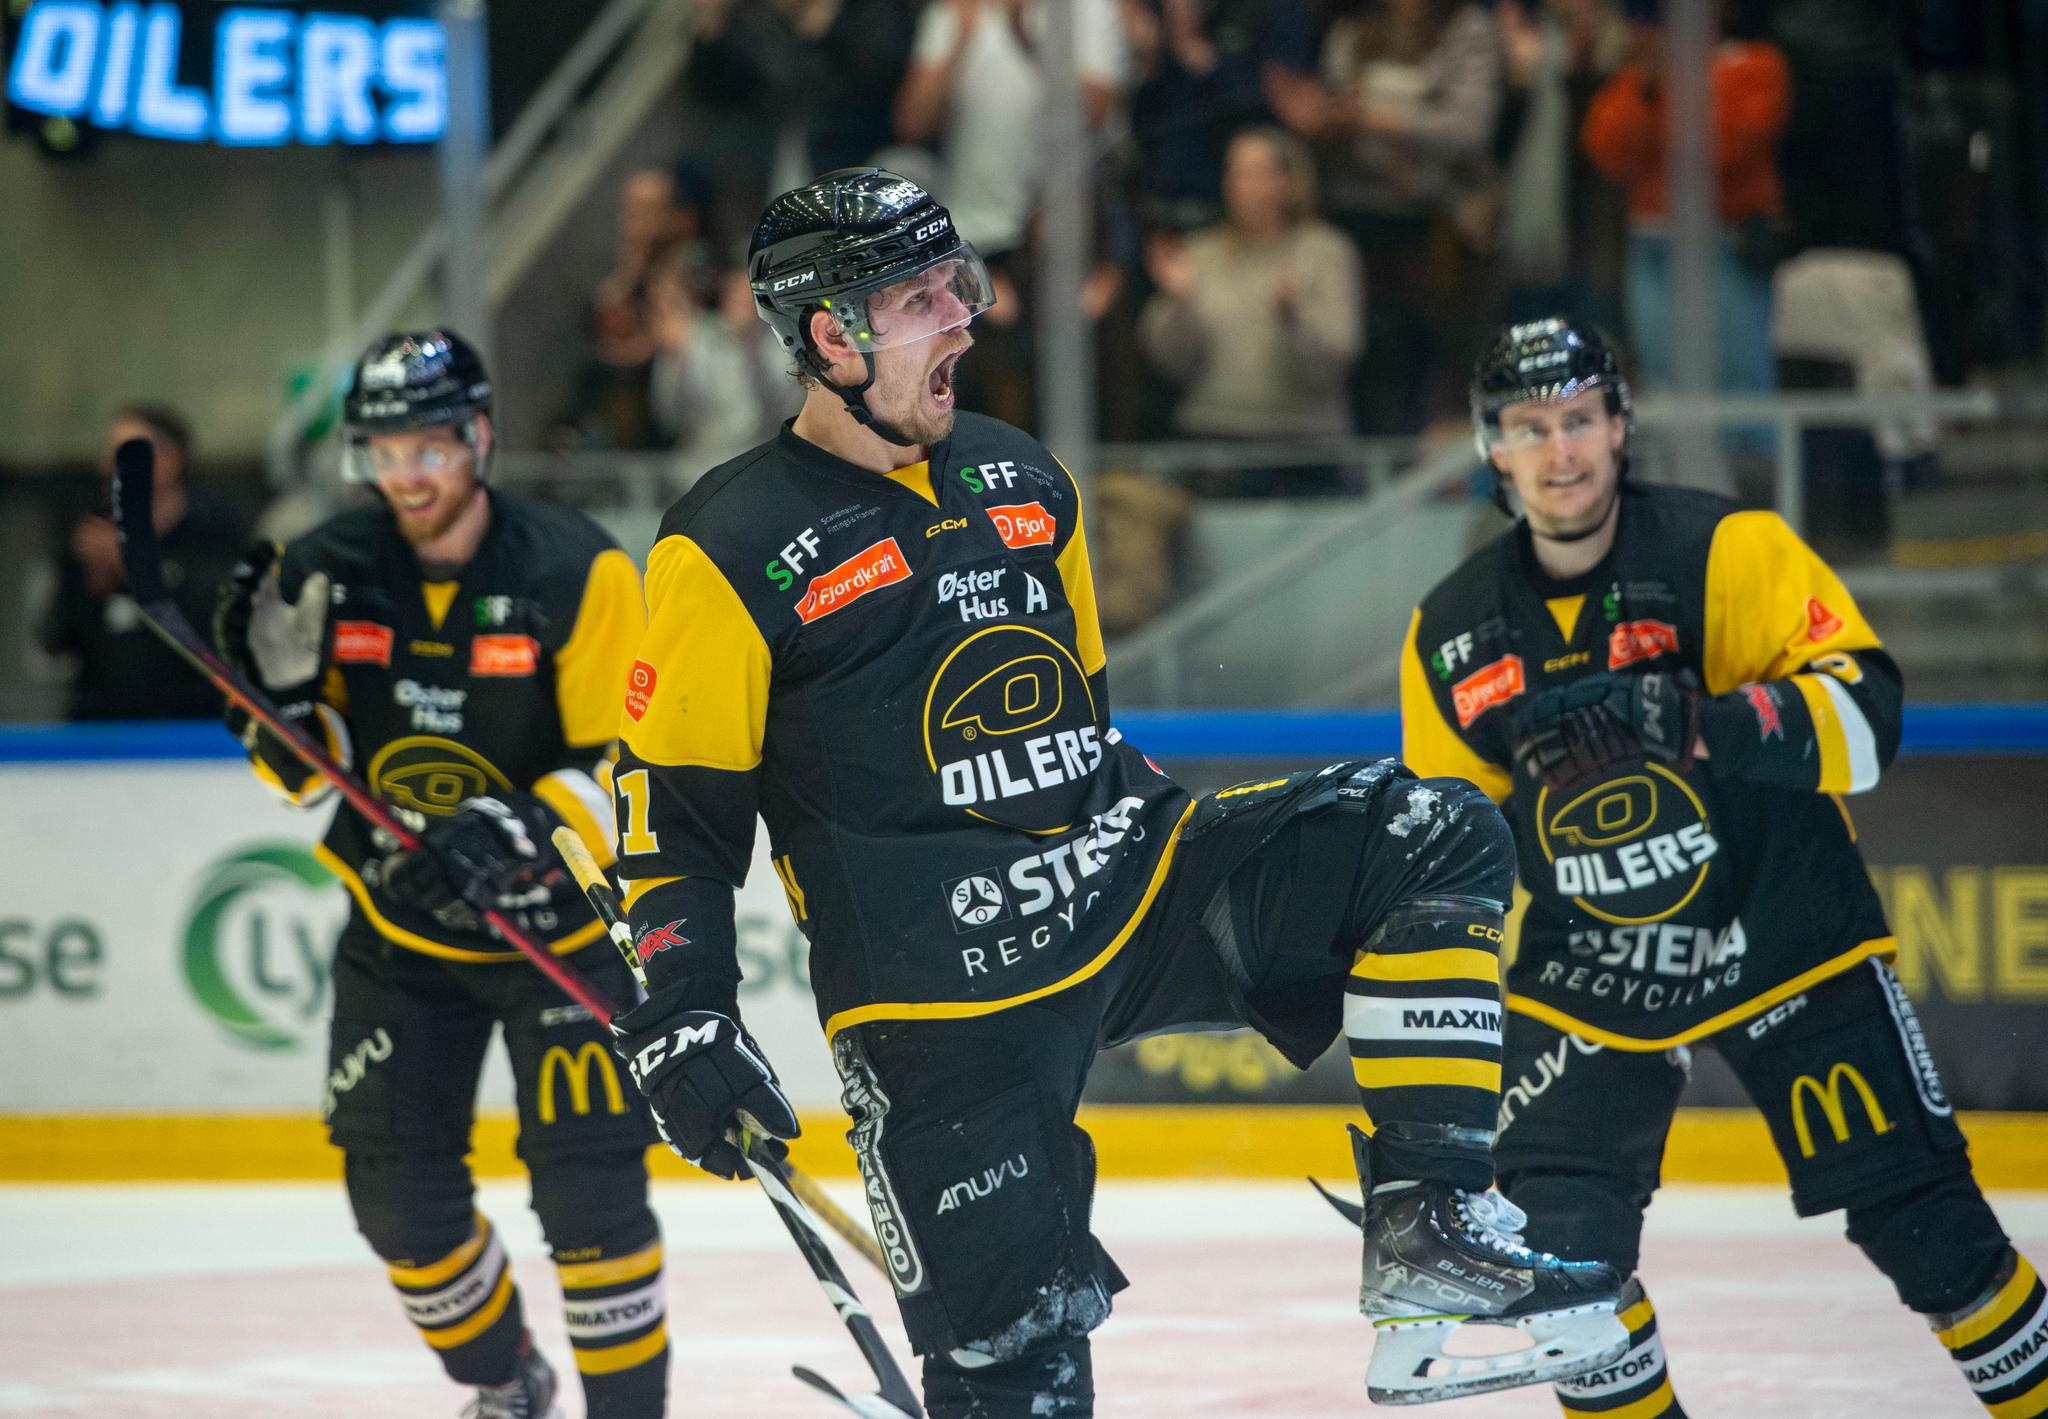 Sent to Storhamar after big win in first NM final